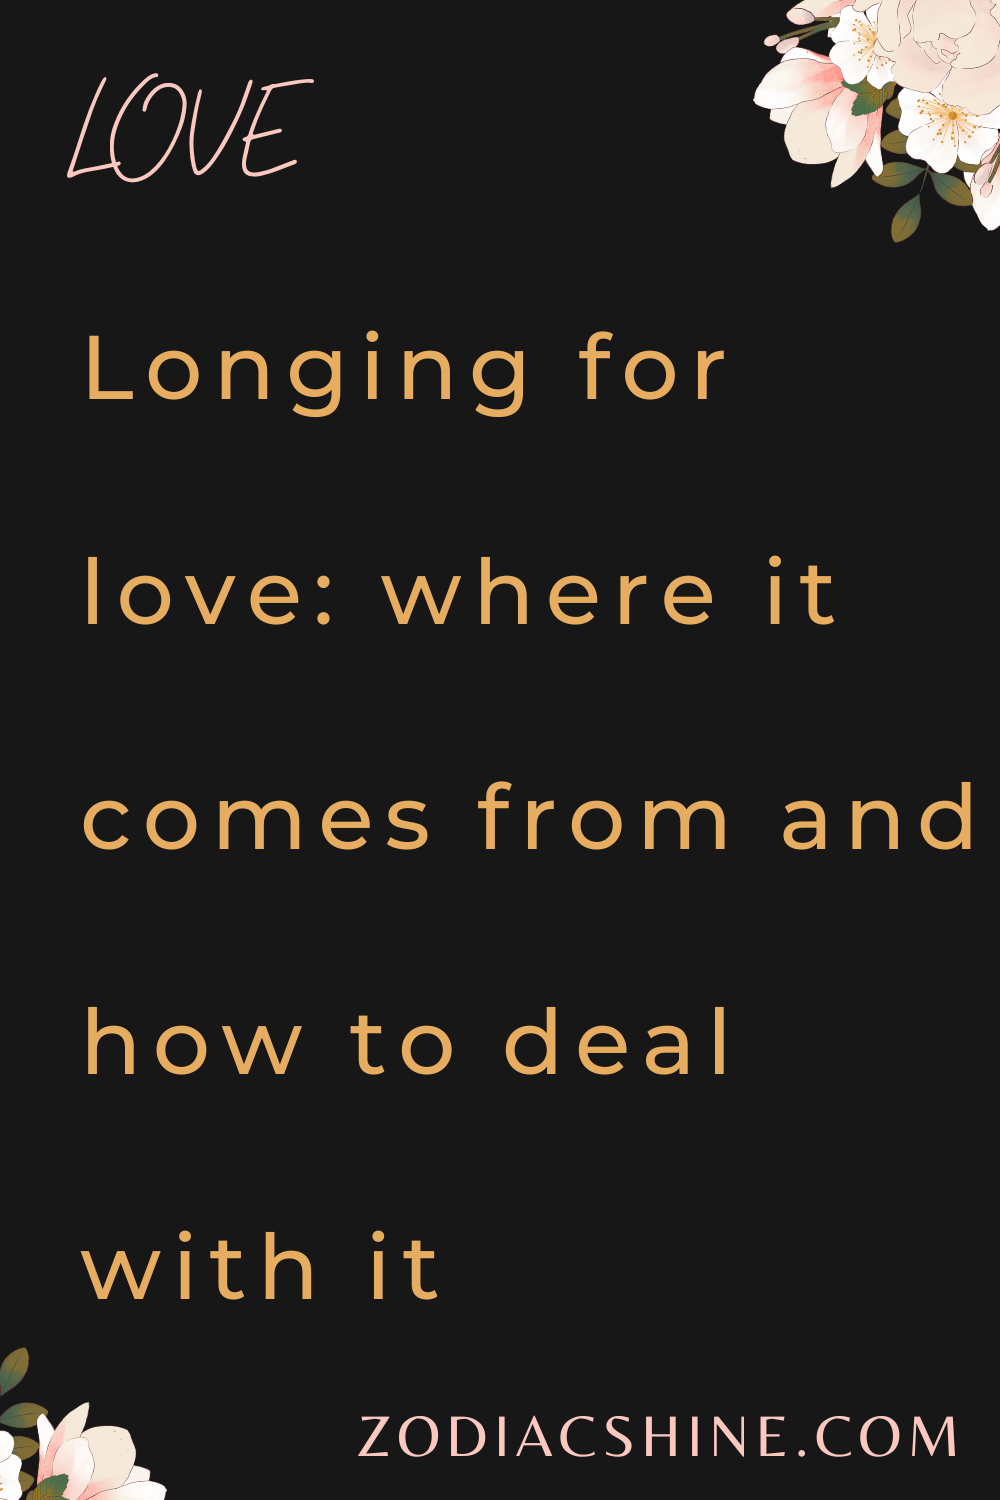 Longing for love where it comes from and how to deal with it